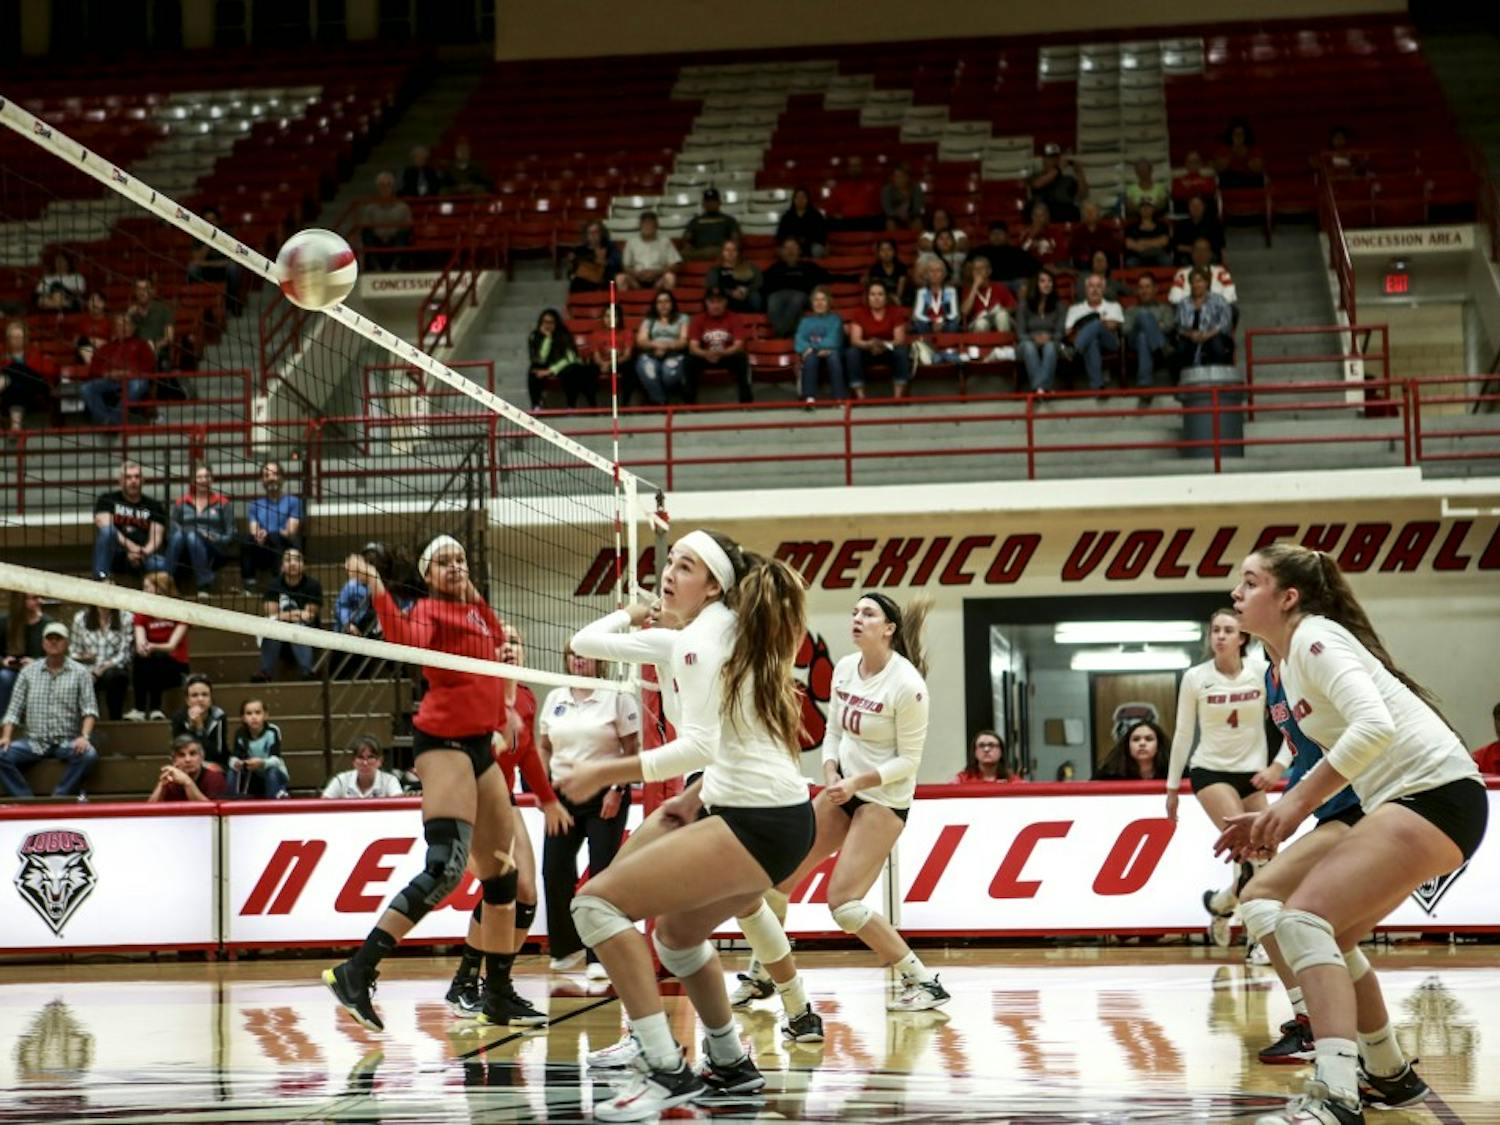 UNM outside hitter Carly Beddingfield prepares to hit the ball during a match against San Diego State on Thursday, Oct. 12, 2017. The Lobos lost the match 1-3.
